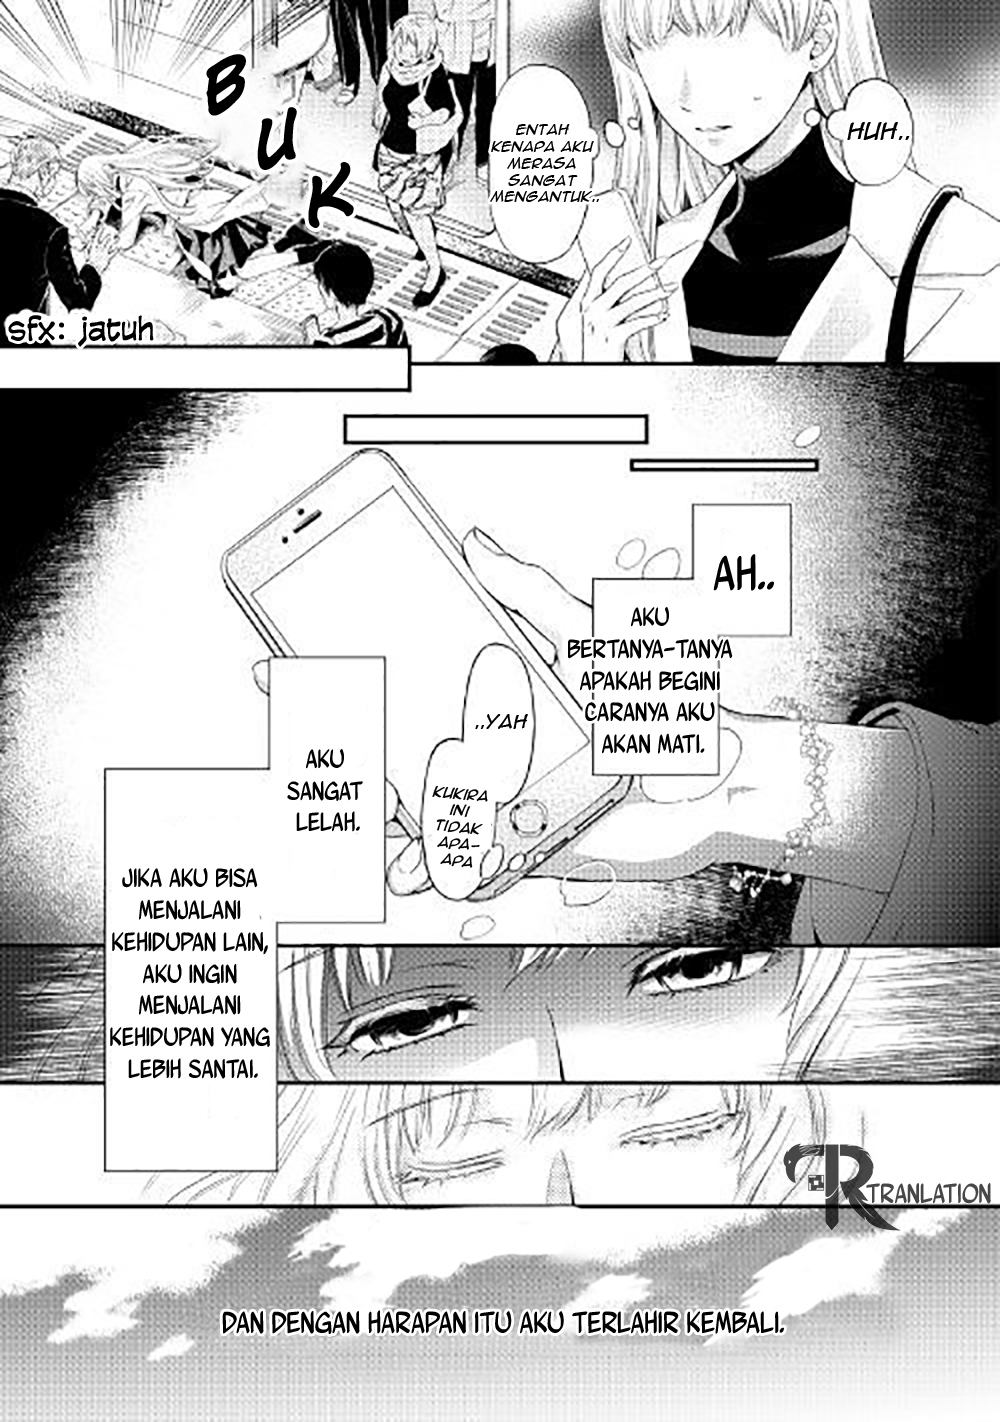 Milady Just Wants to Relax Chapter 01 4